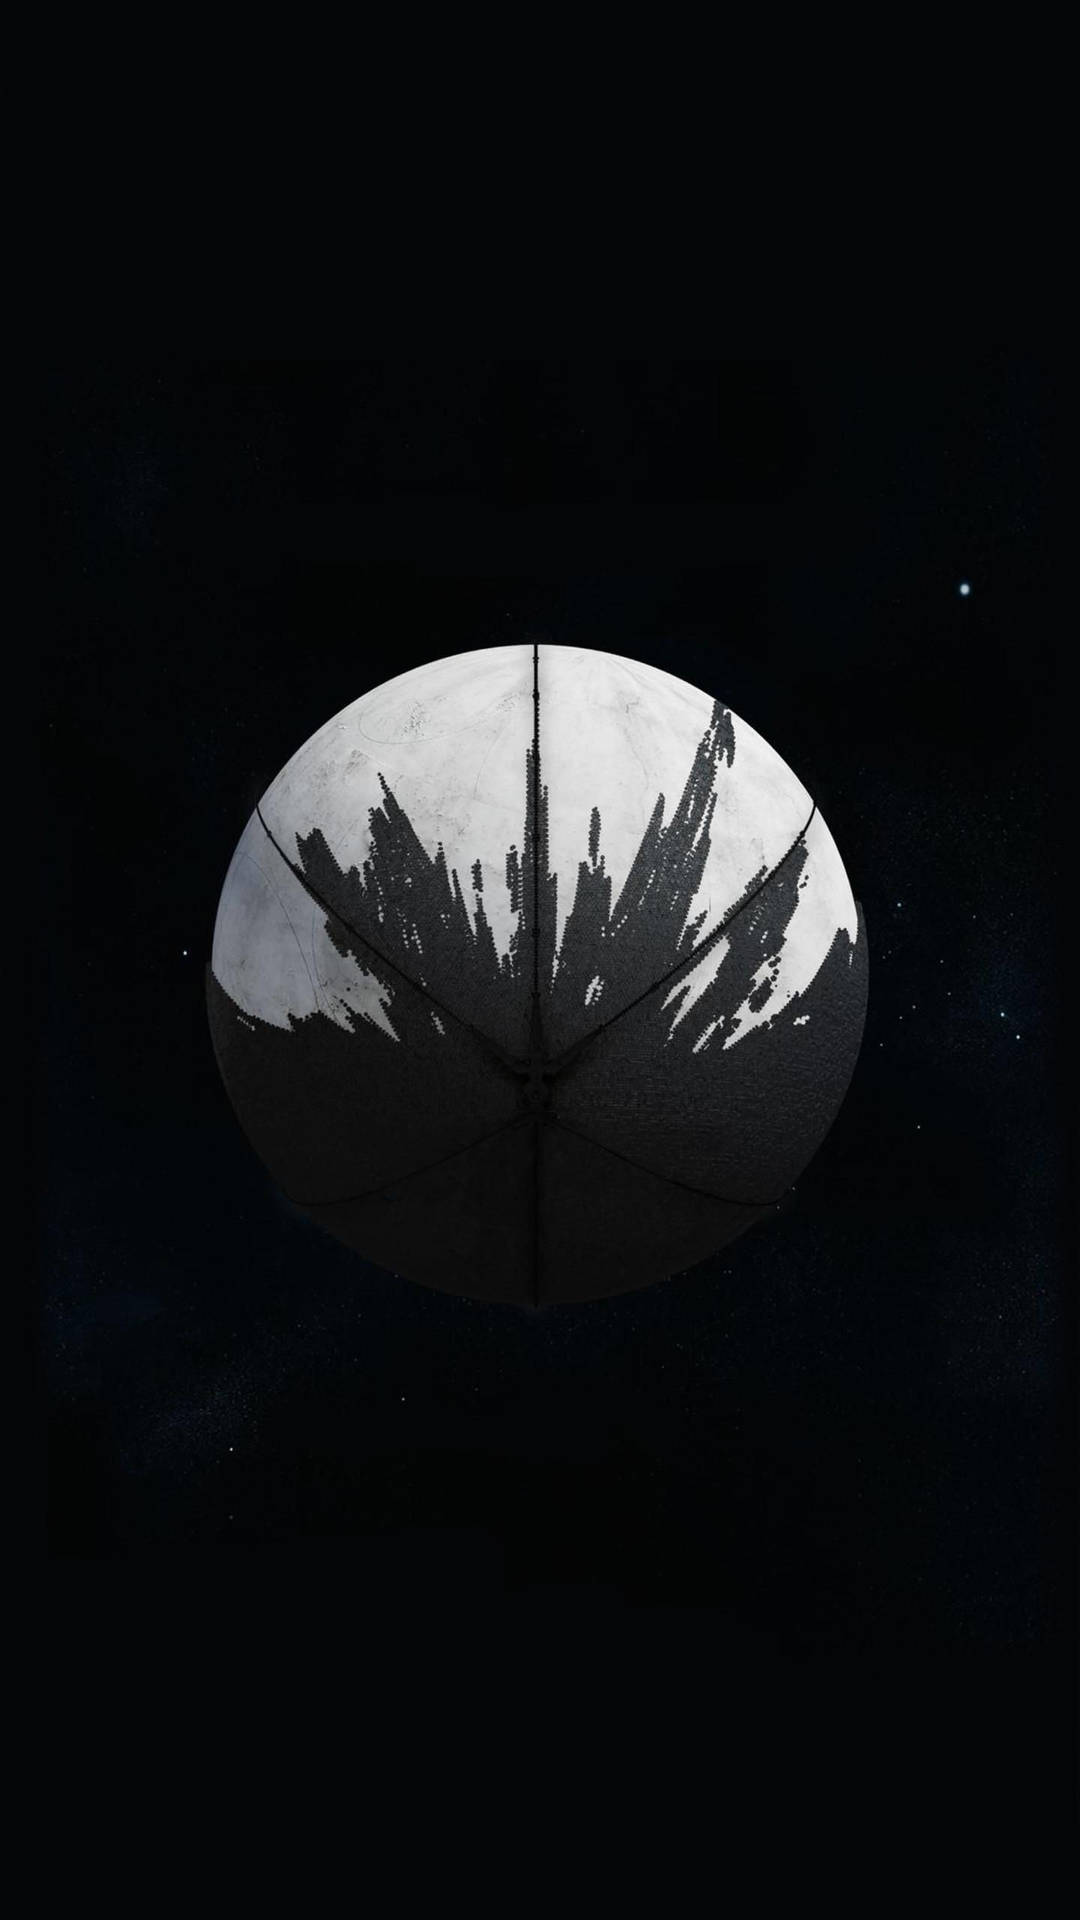 Destiny 2 Iphone Planet Black And White Wallpaper